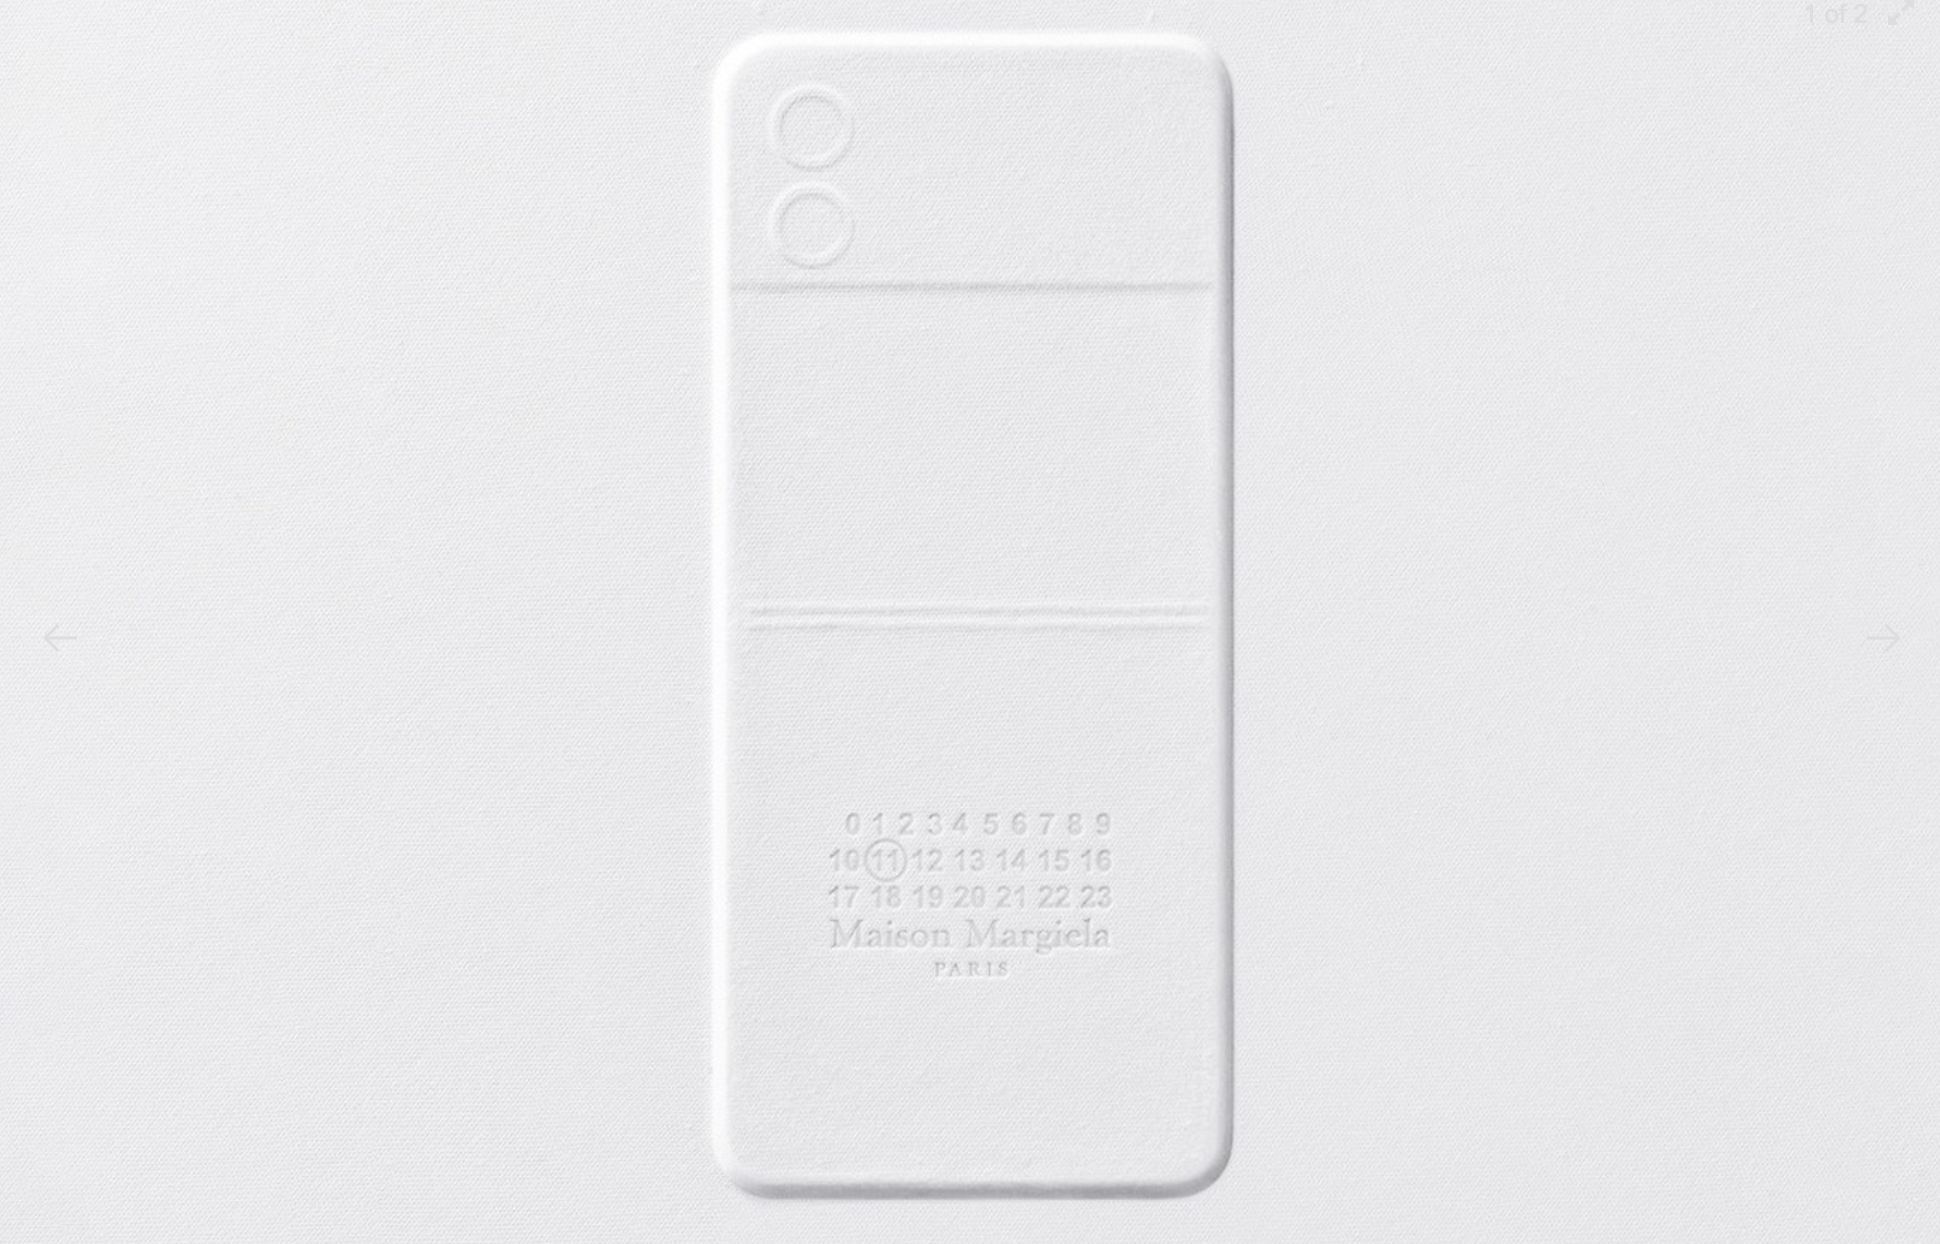 Samsung Teases Upcoming Collaboration With Maison Margiela